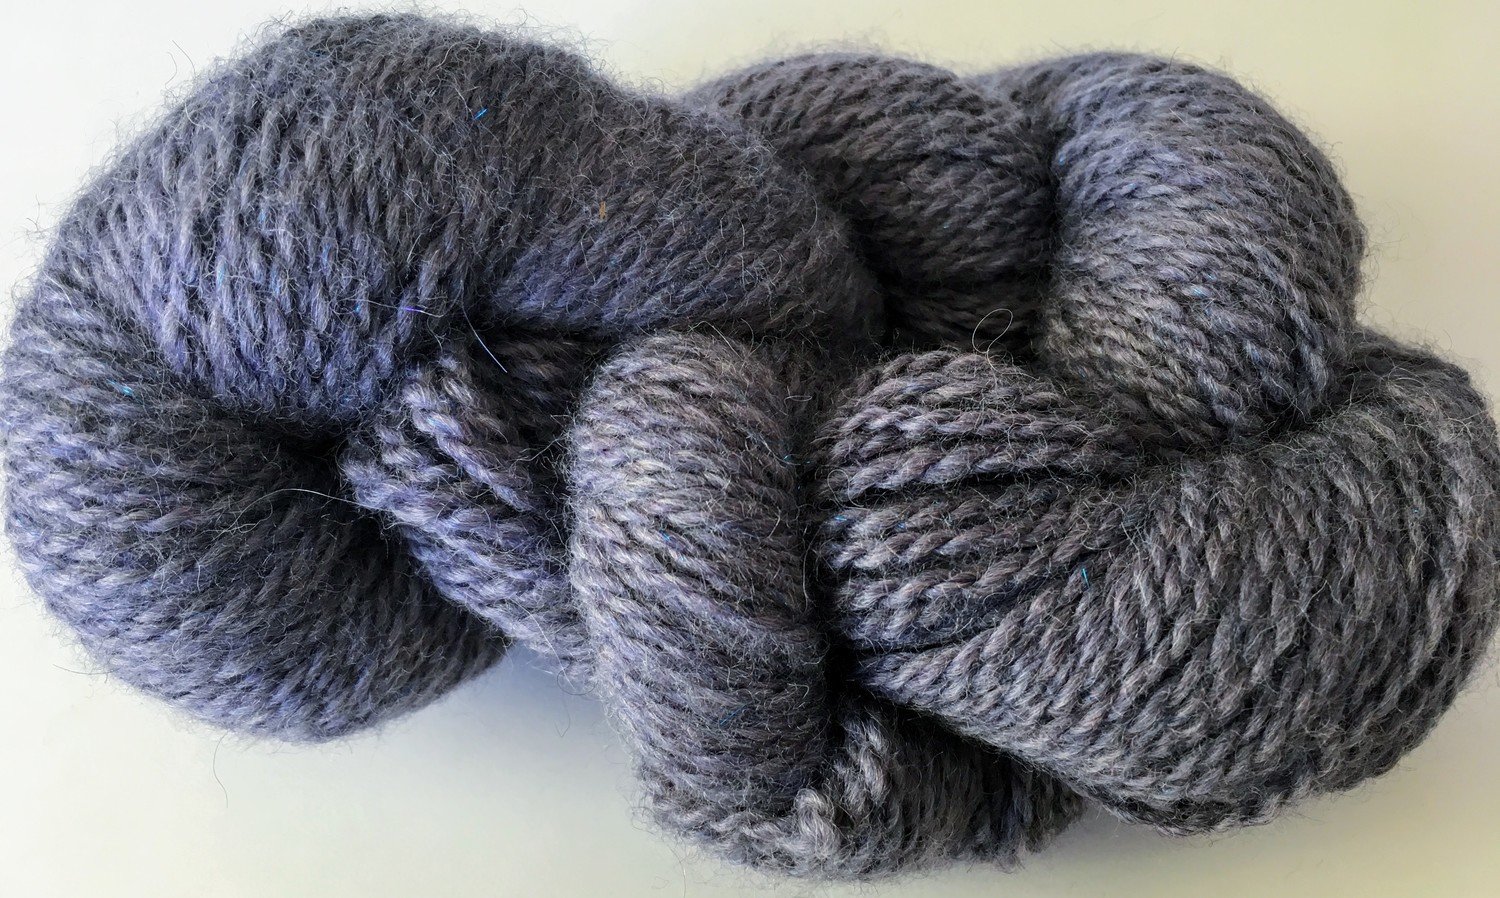 Breezy Hill Cottage-Milled, Hand-Dyed Yarn - Lavender